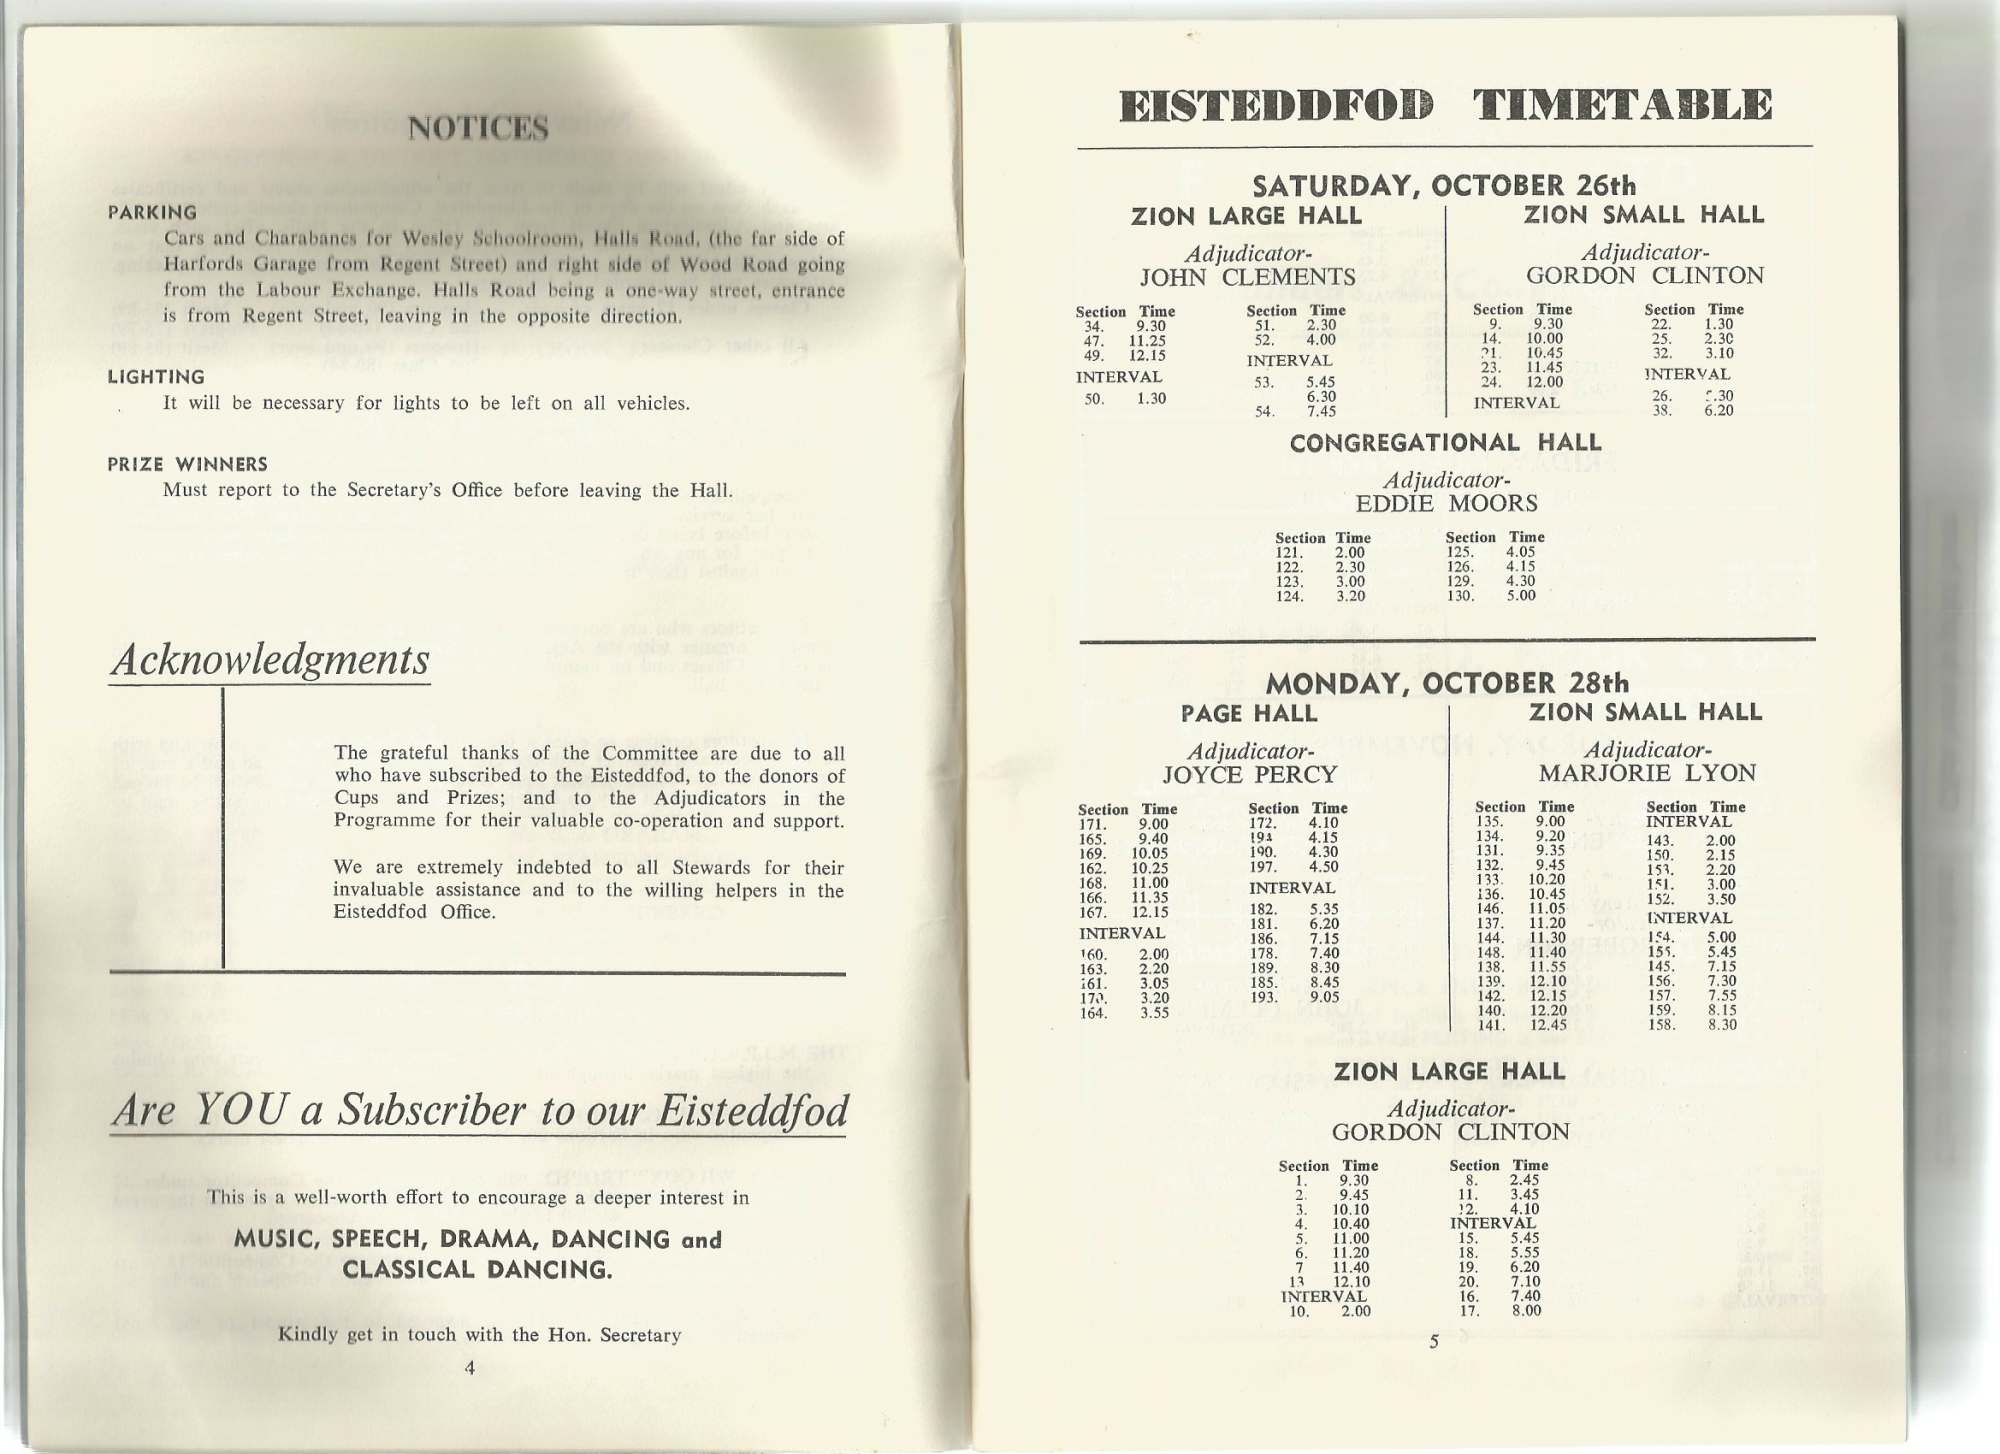 Inside of the 1963 Kingswood and District Eisteddfod programme.